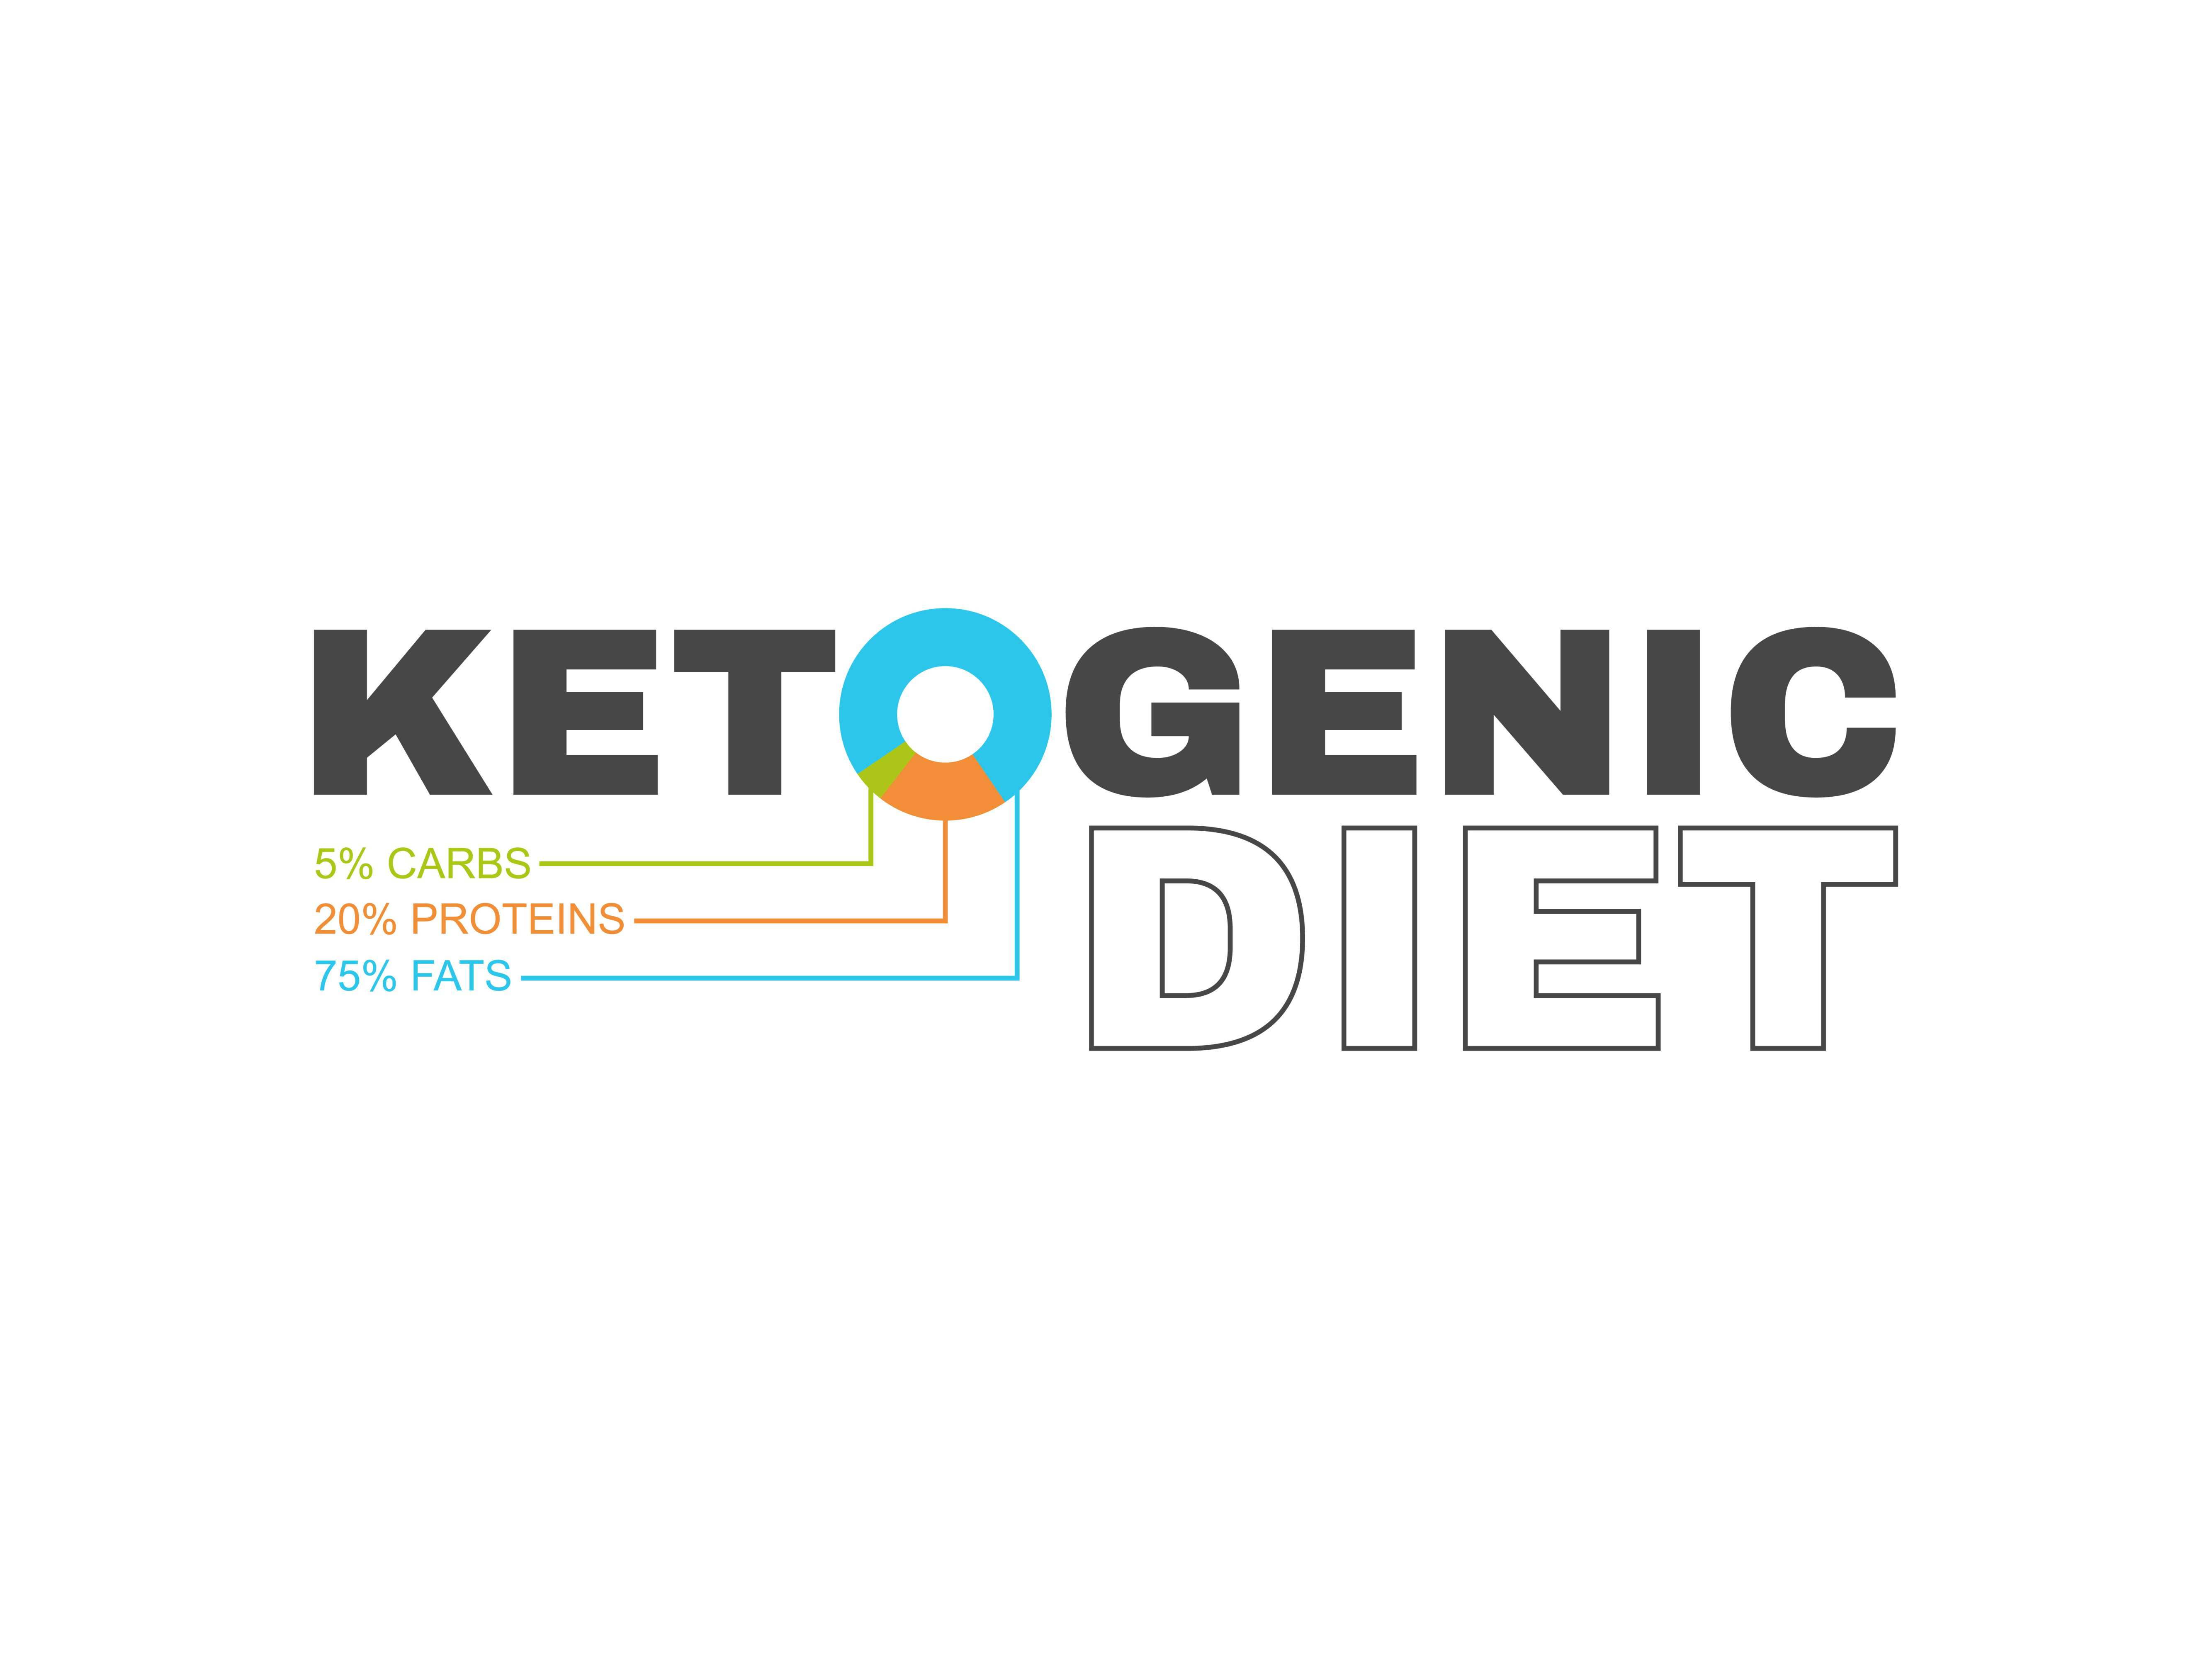 What Is The Keto Fat Diet?